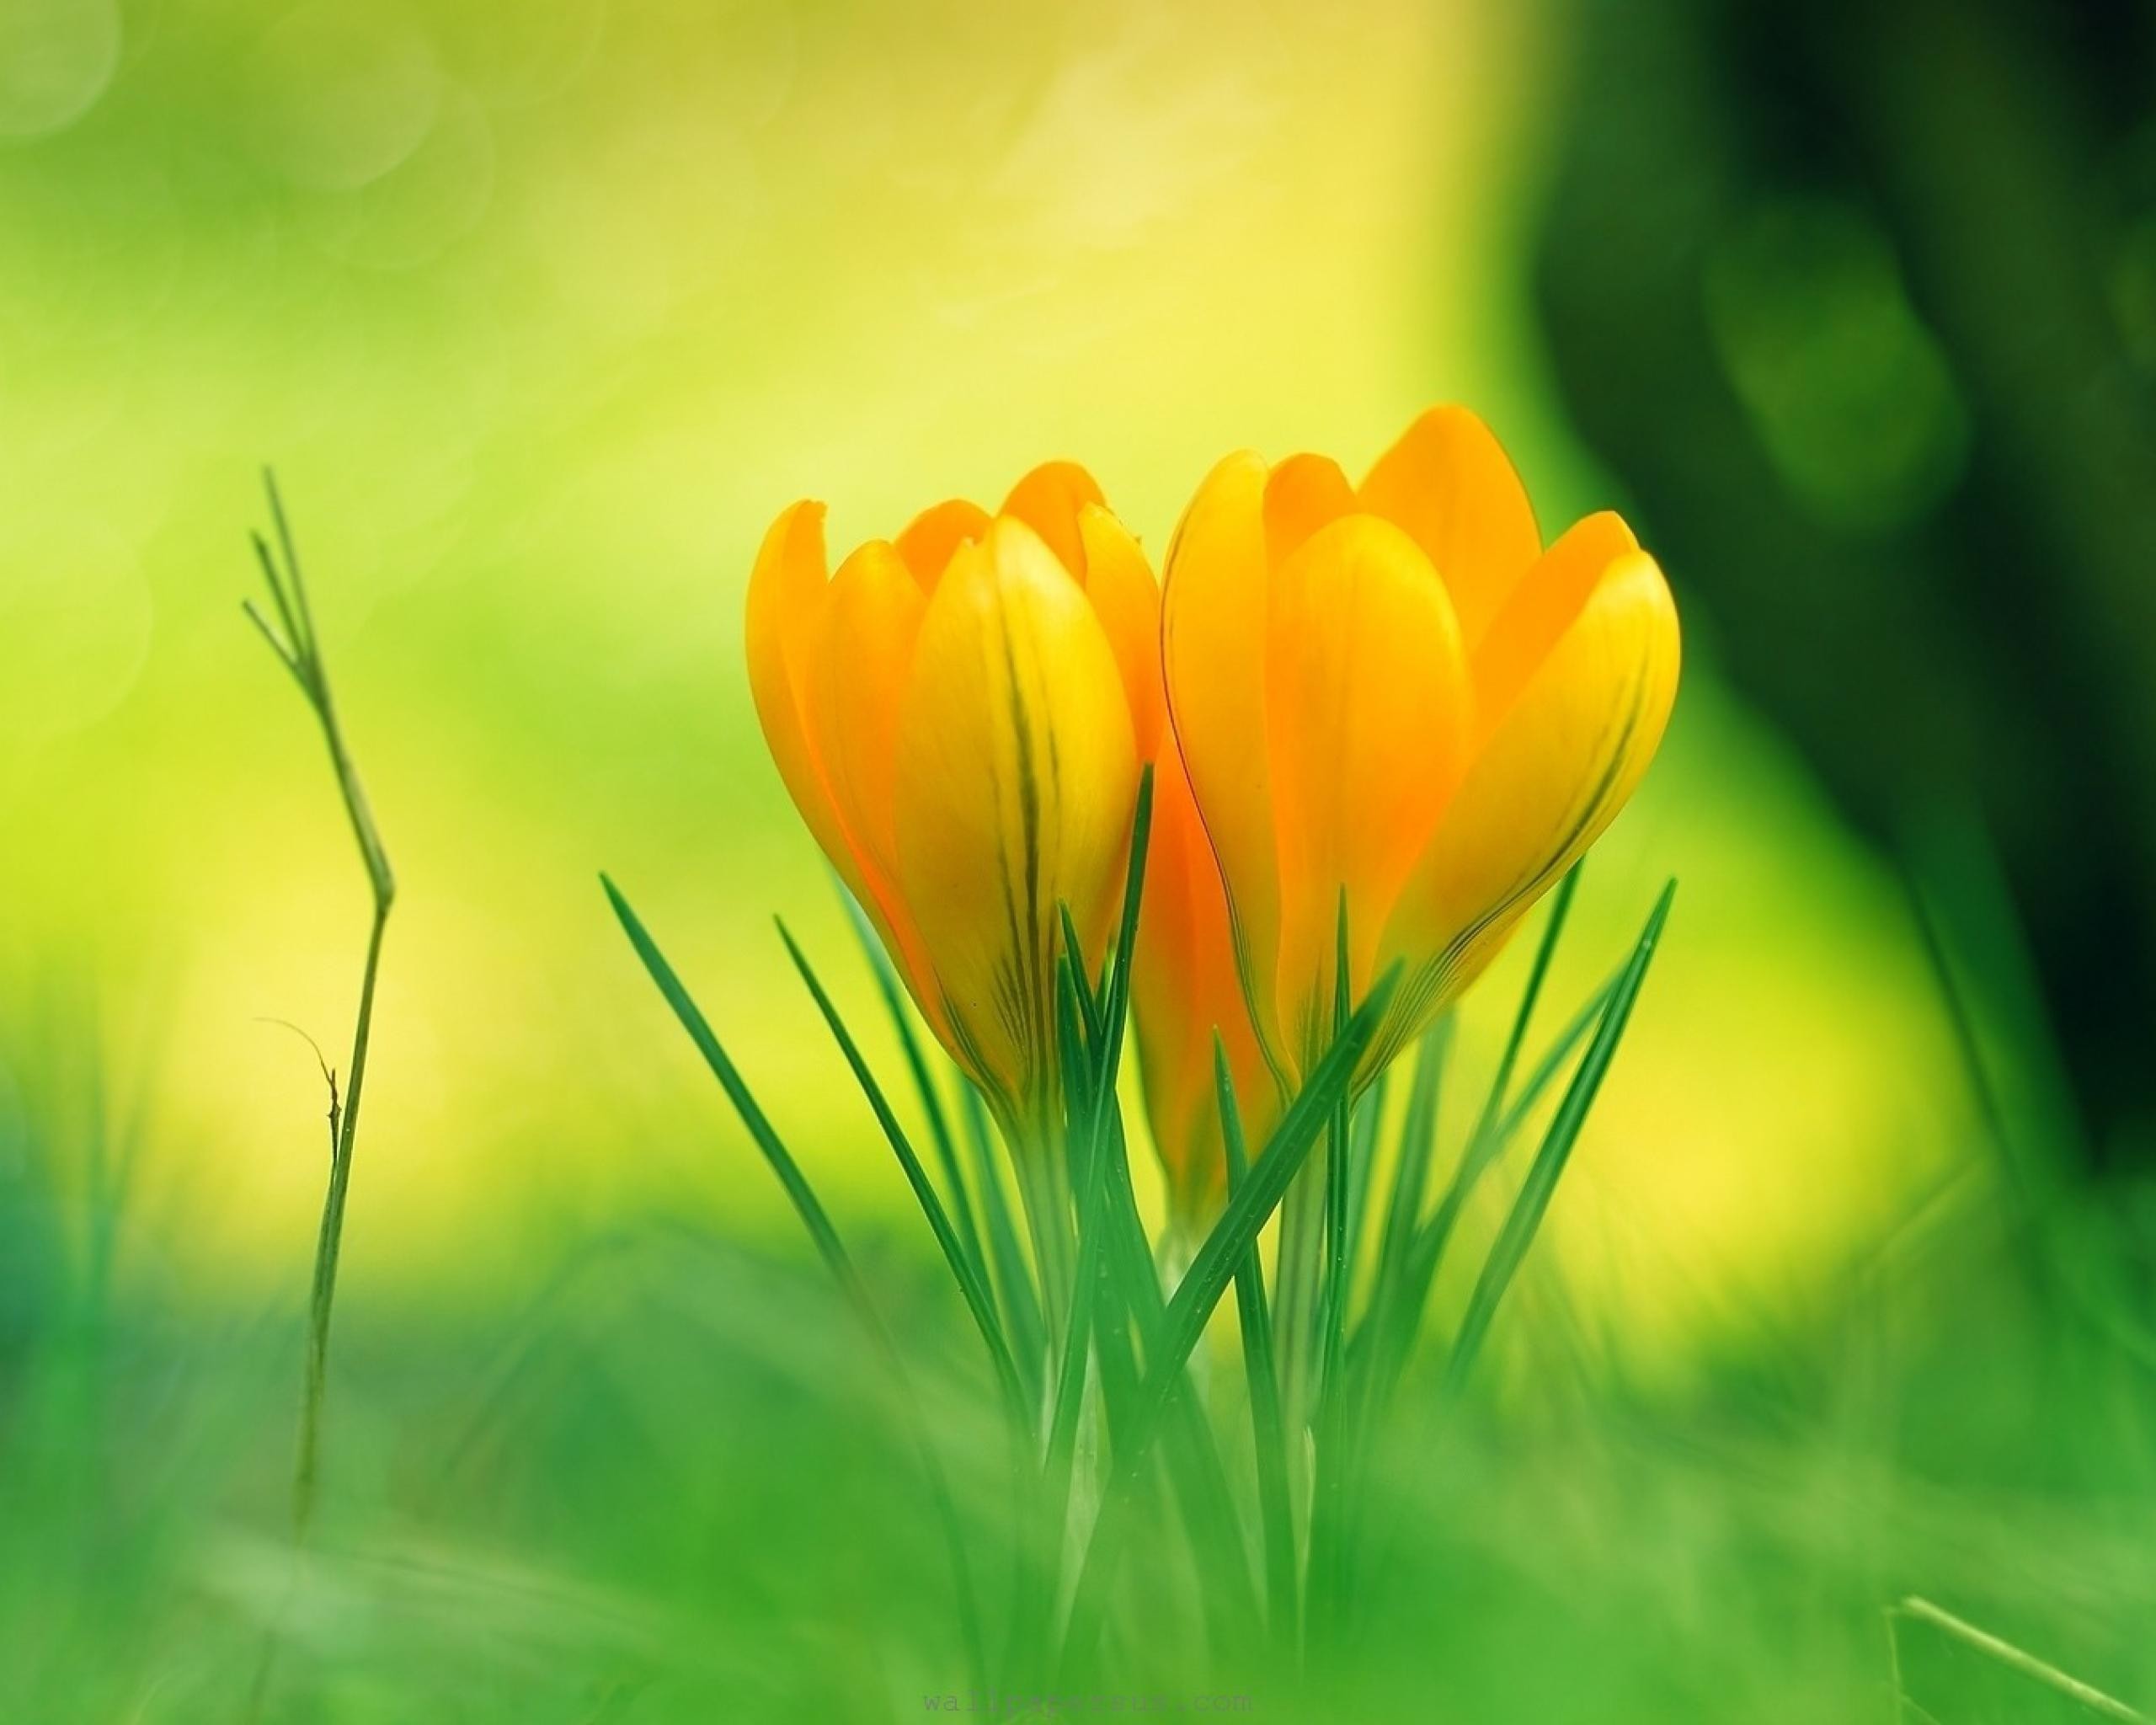 nature flowers wallpaper download,people in nature,green,nature,flower,yellow